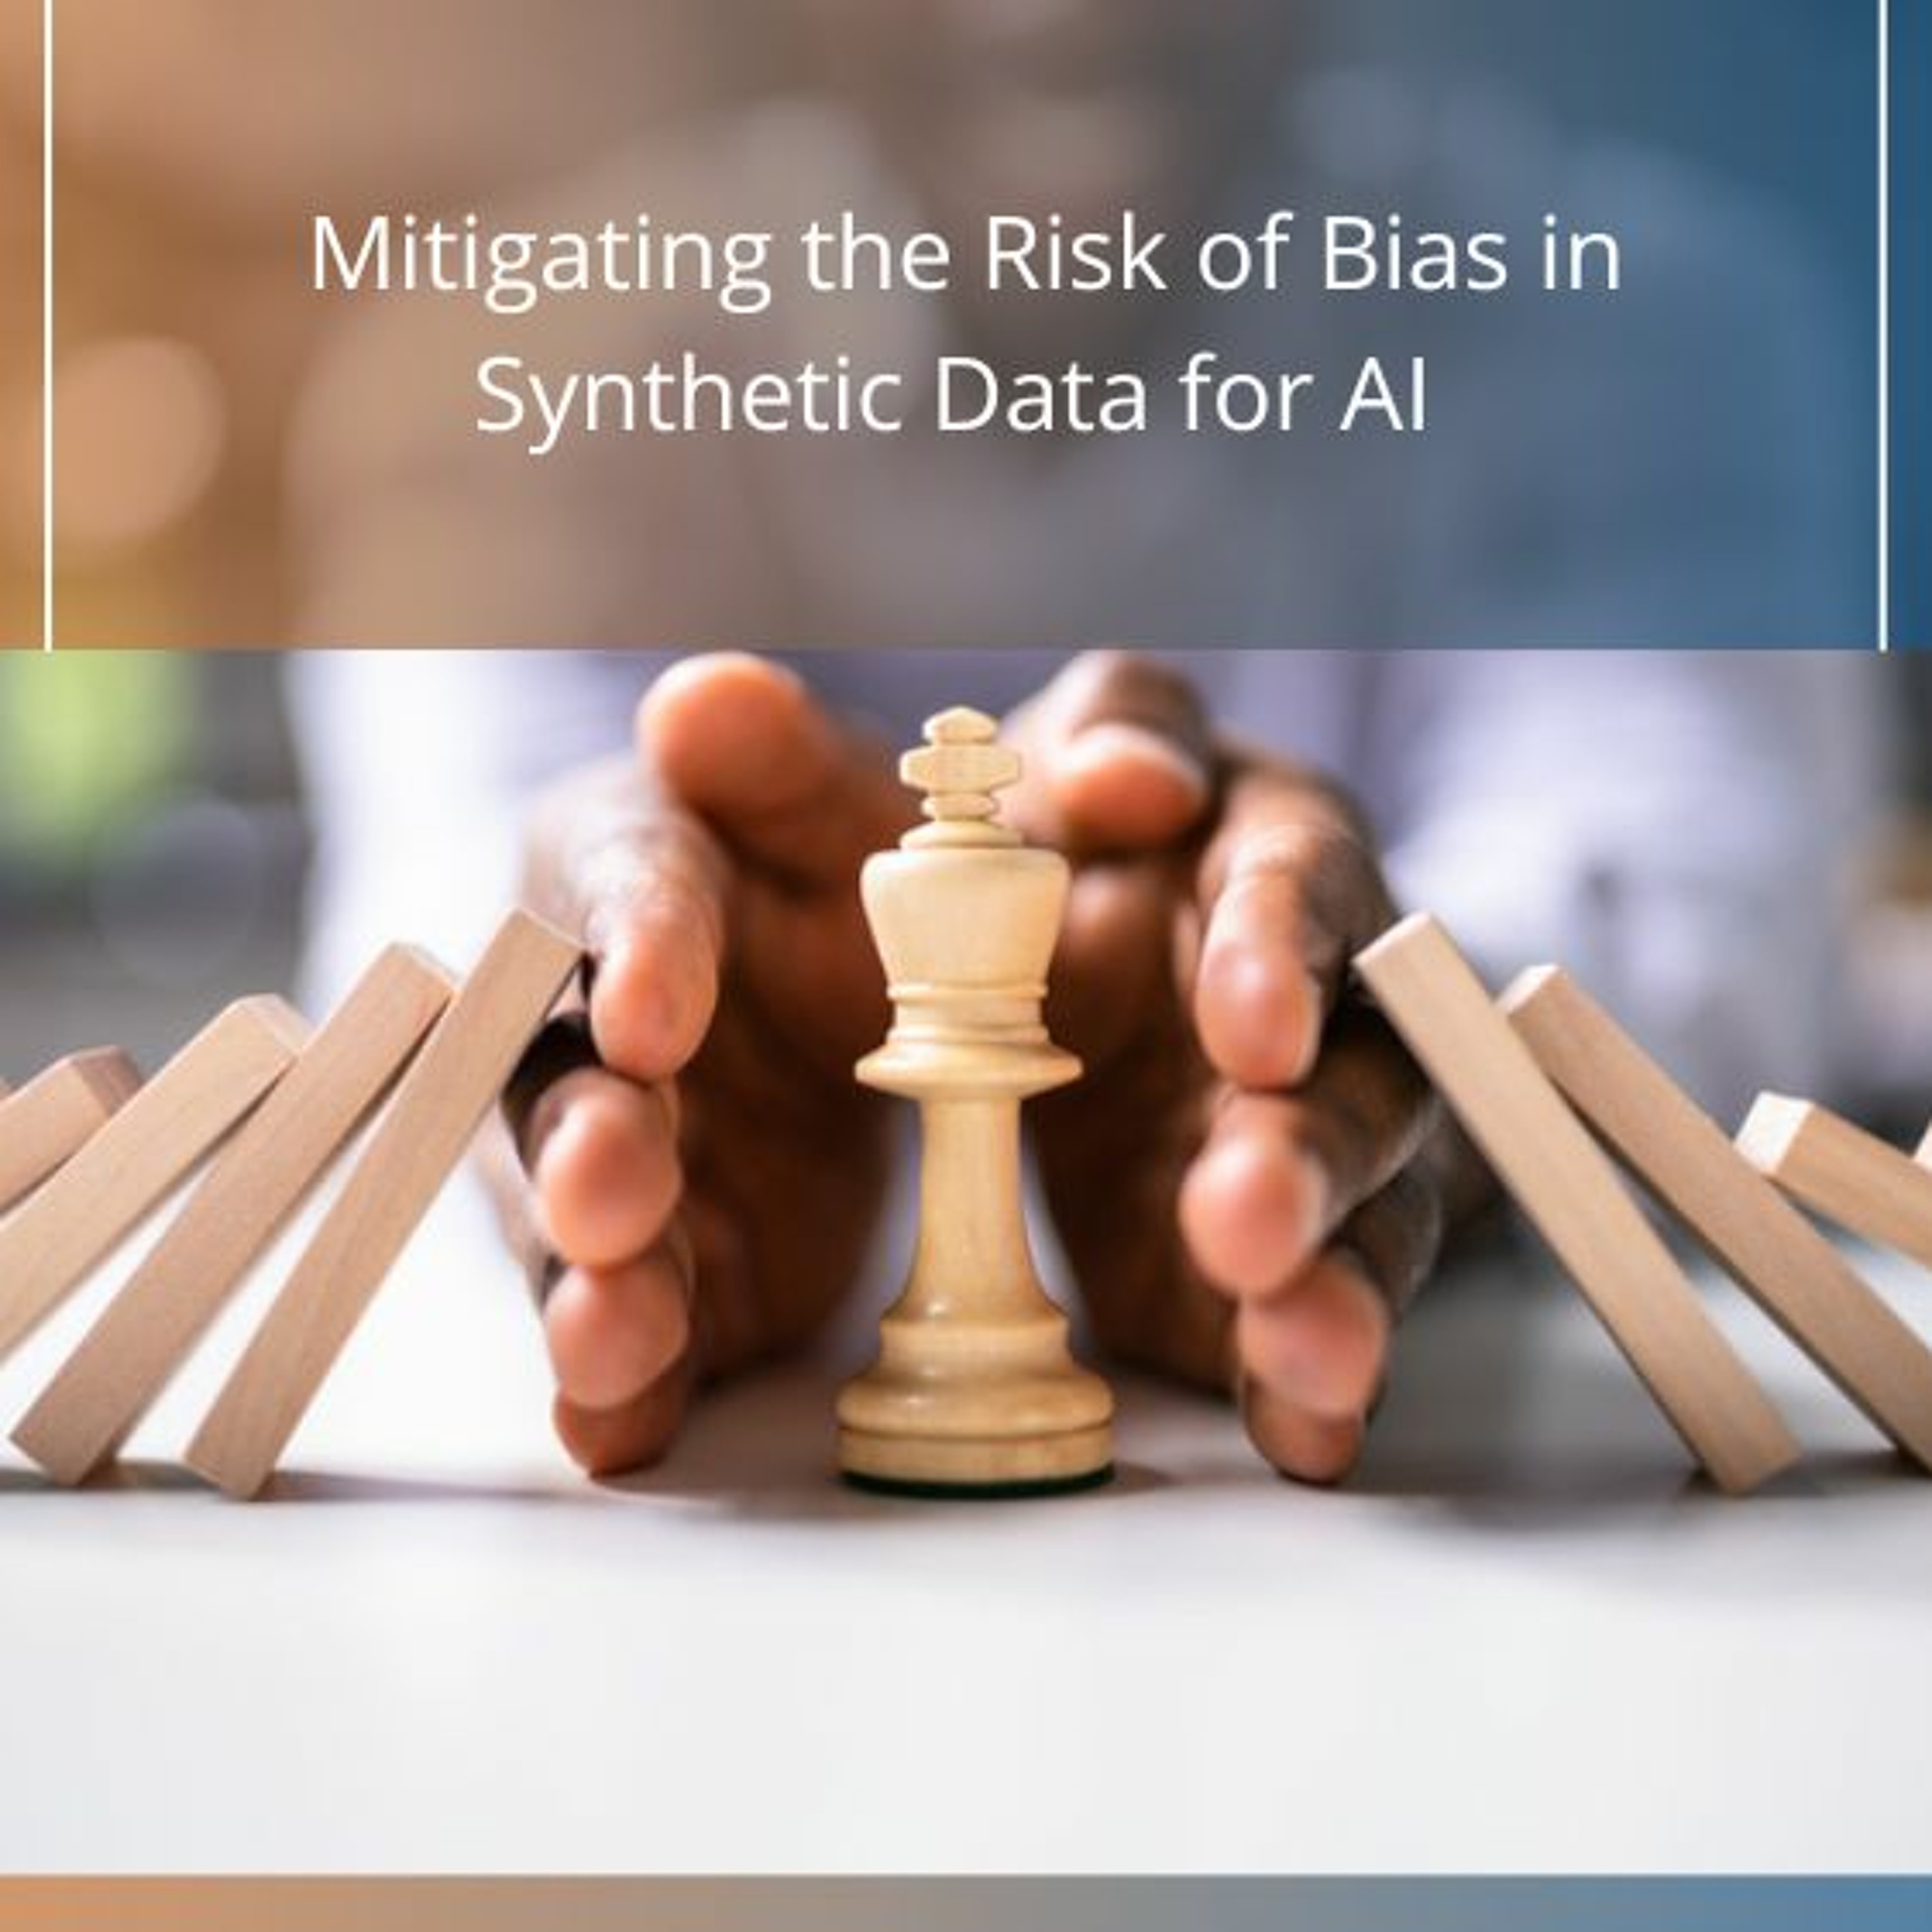 Mitigating the Risk of Bias in Synthetic Data for AI - Audio Blog